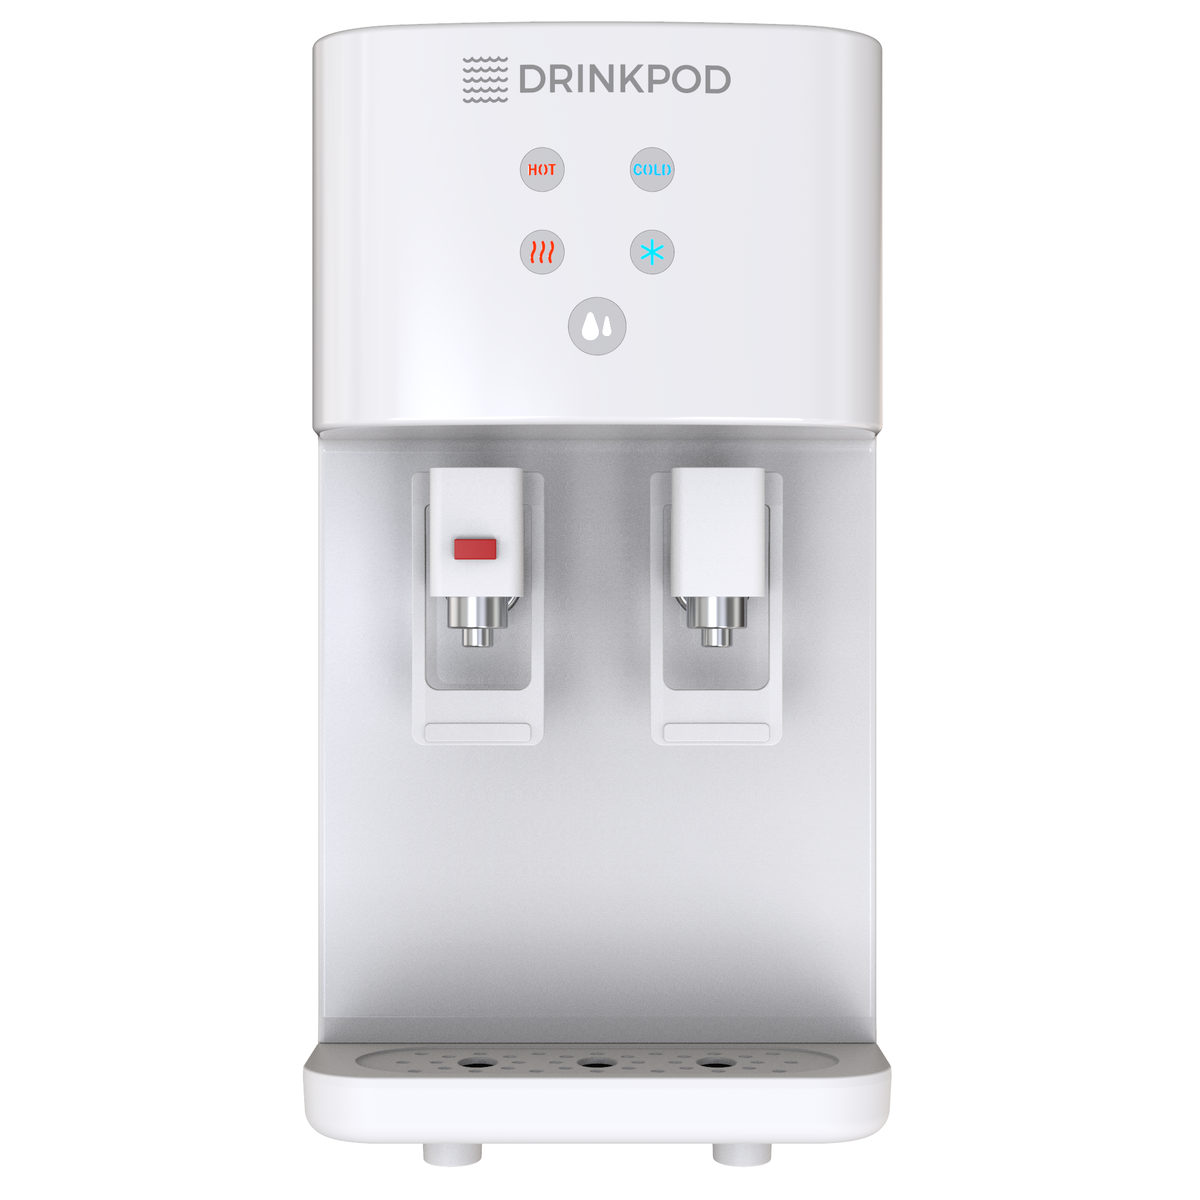 Drinkpod 3000 Elite Series Bottleless Water Cooler with 4 Filters and Integrated K Cup Coffee Maker